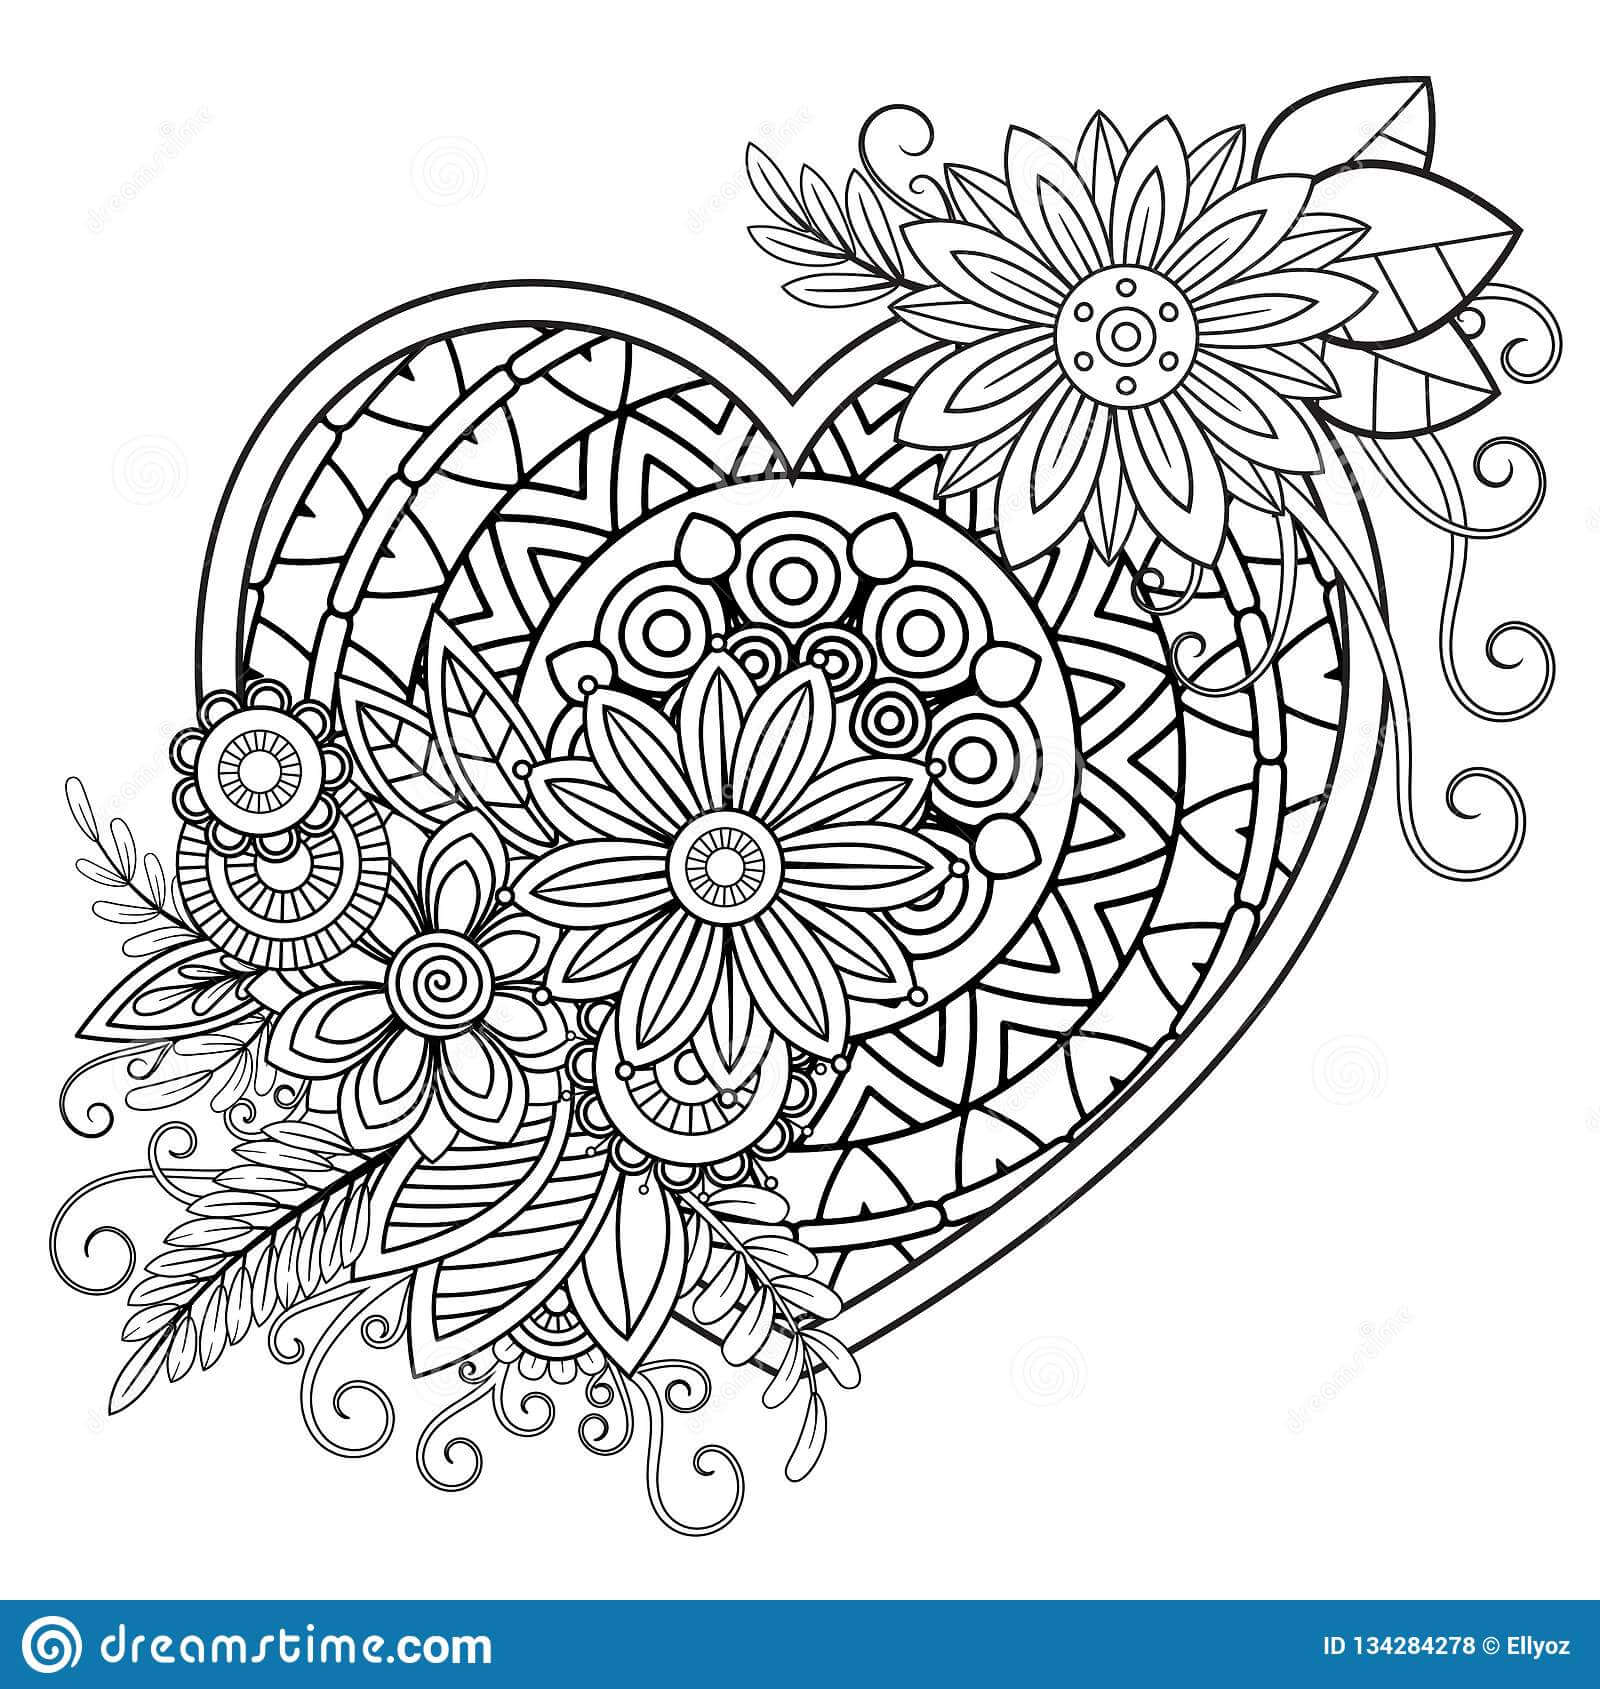 valentines day coloring pages for mom | free valentines day coloring pages | valentines day coloring pages for preschoolers